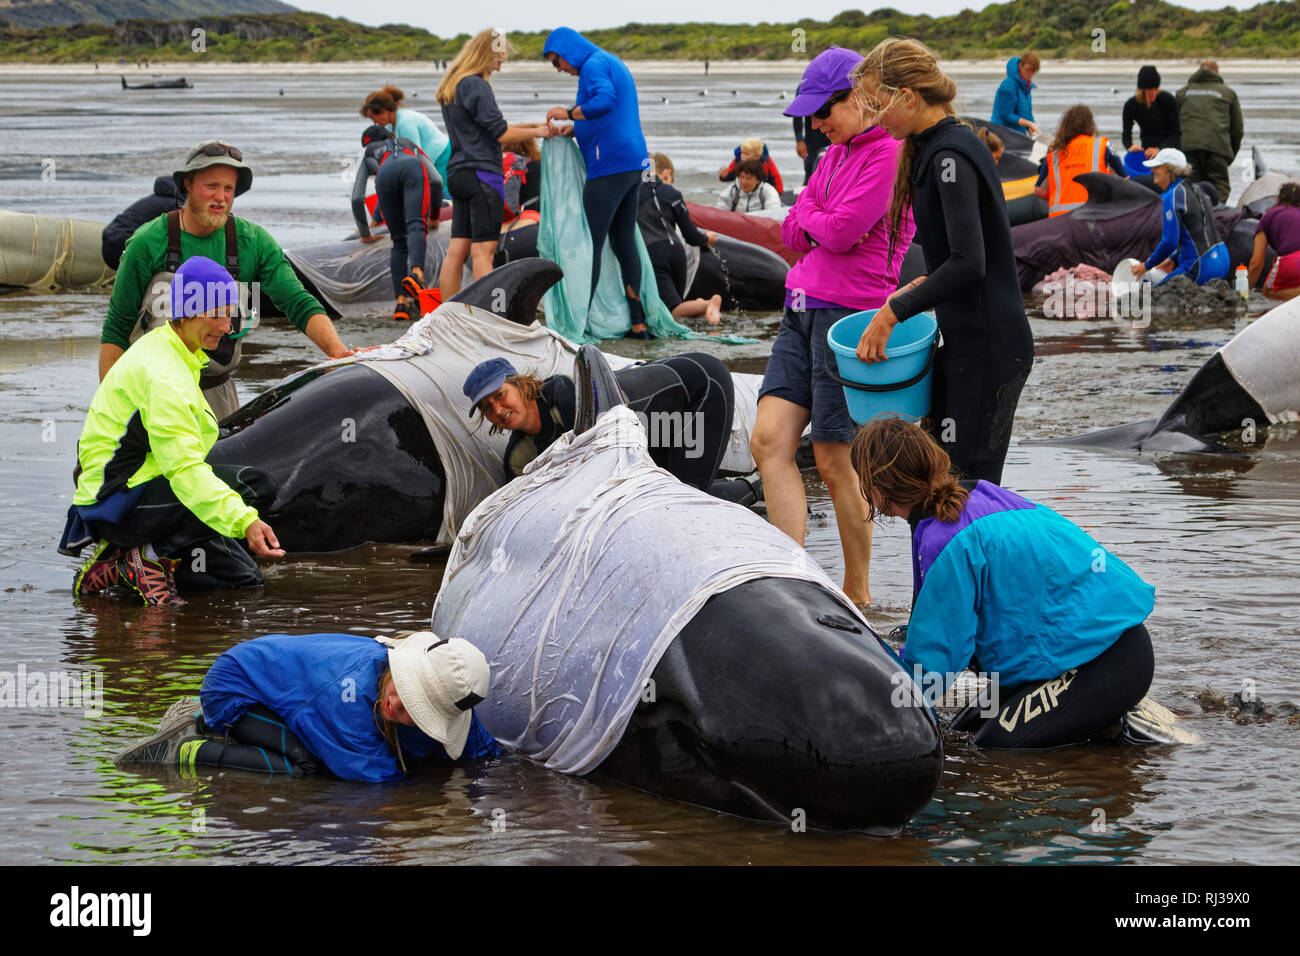 Stranded pilot whale beached on Farewell Spit at the northern tip of New Zealand's South Island, being cared for by volunteers. Stock Photo